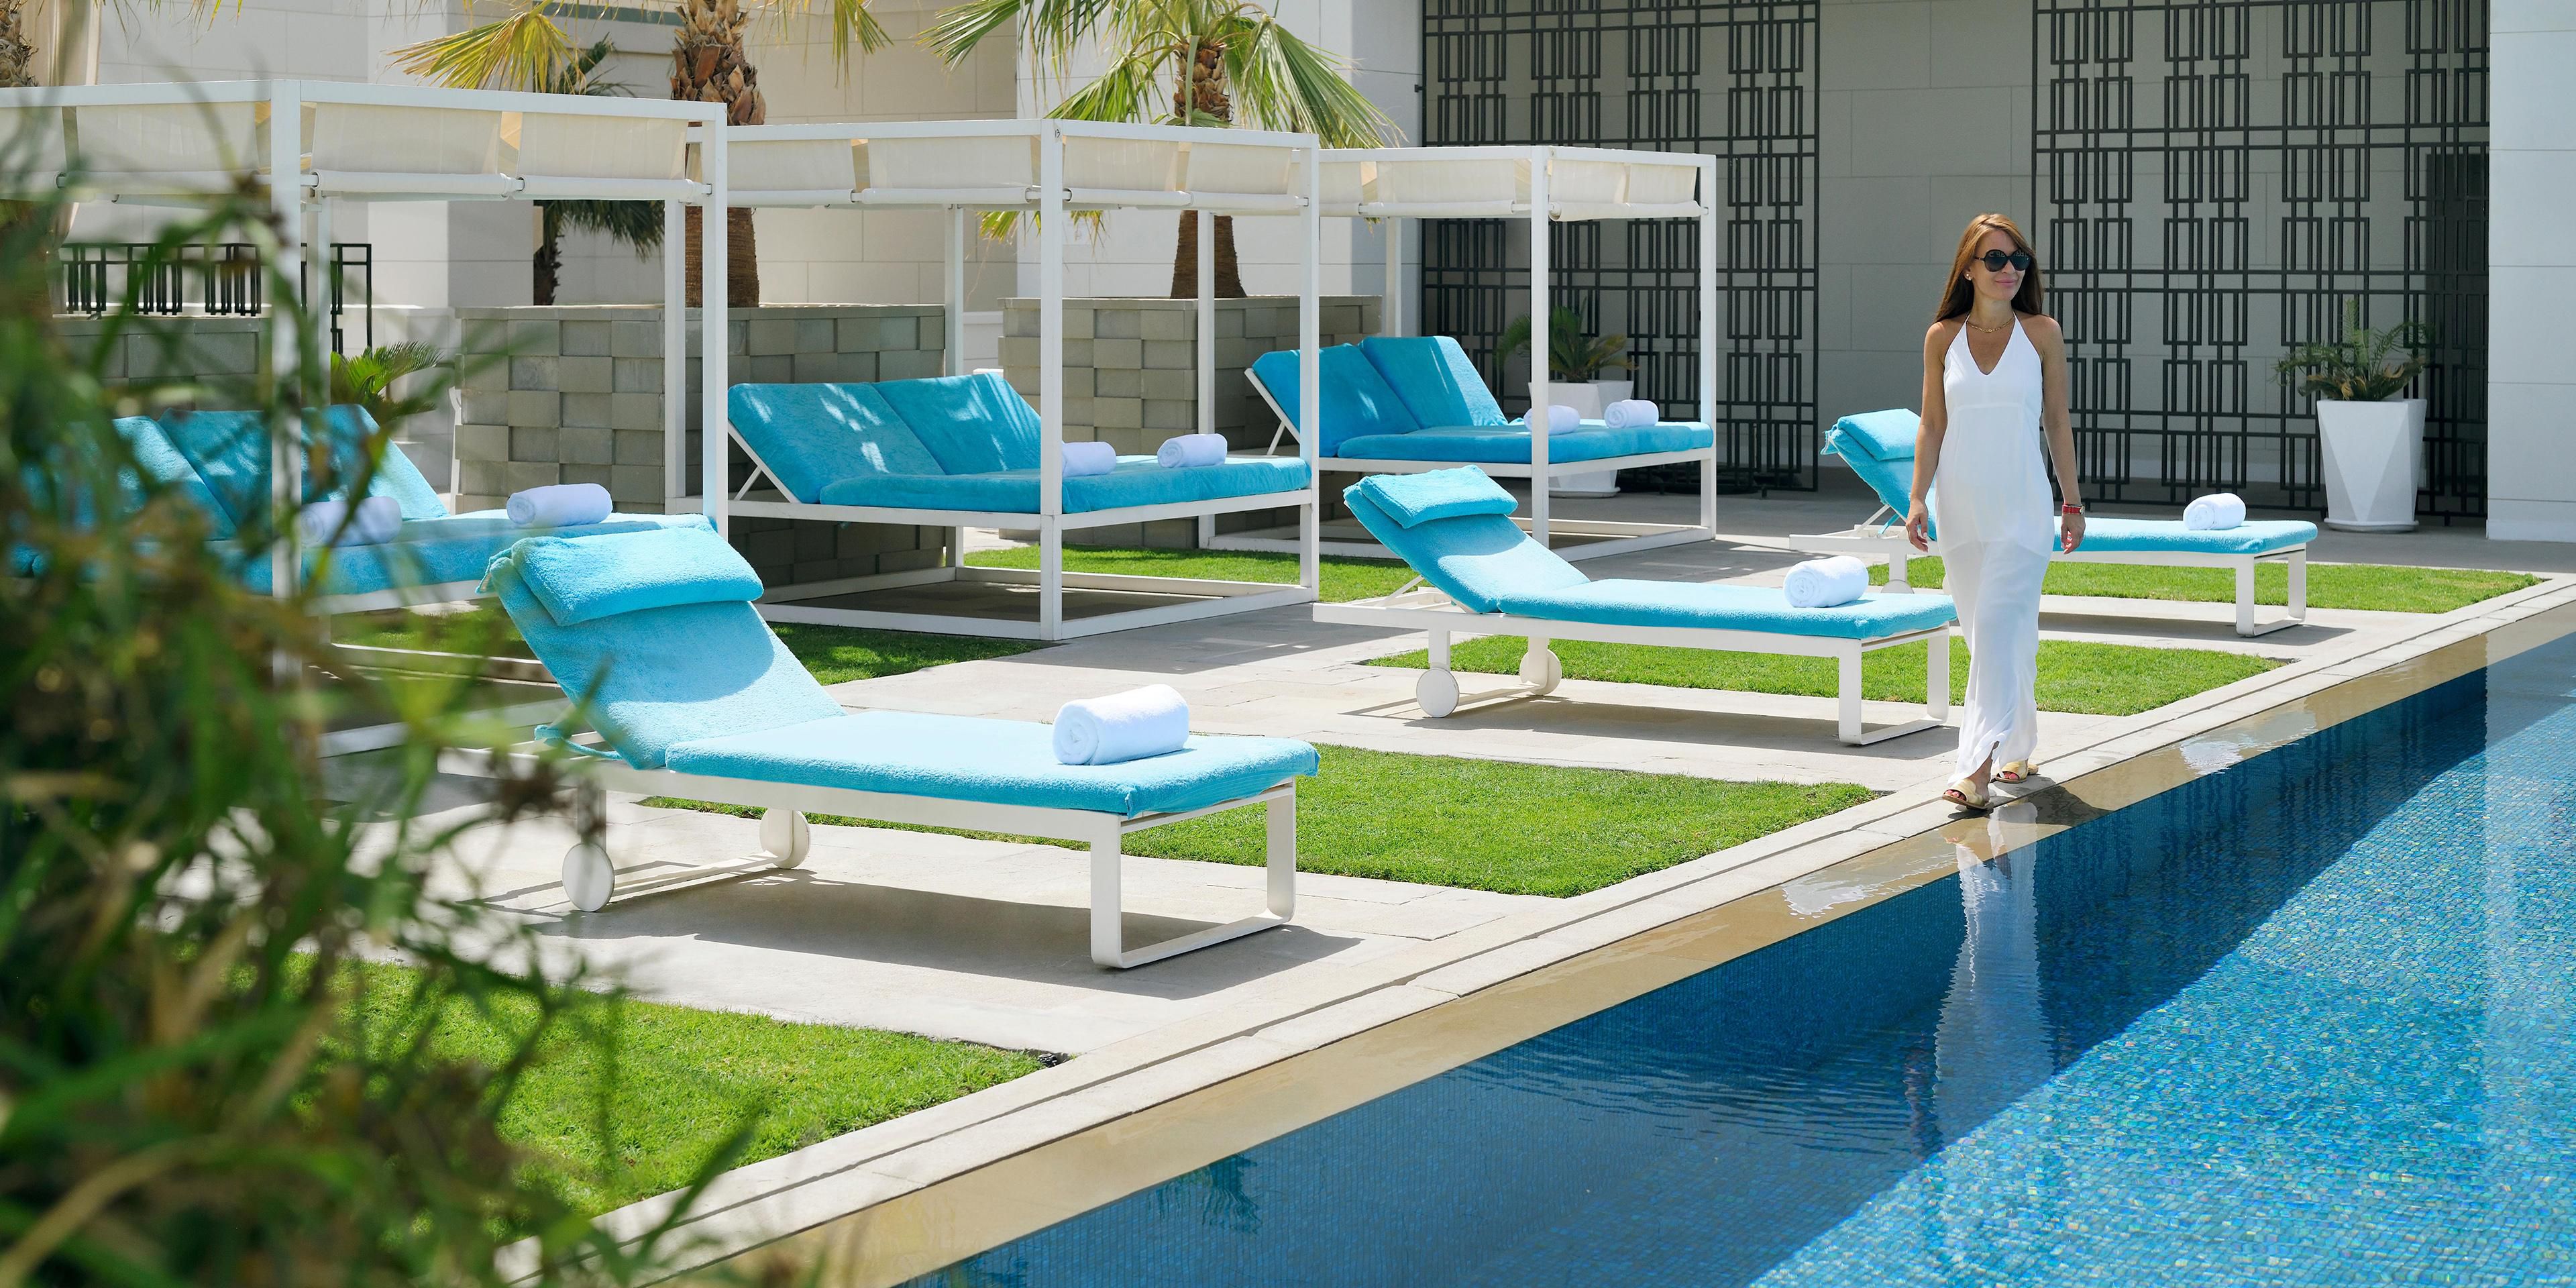 Escape from the stress of the city and enjoy a unique moment in a green oasis in the heart of Manama. At our serene Elements Pool & Lounge you can relax on a daybed with a refreshing mocktail, or enjoy the evening breeze from our poolside tables while enjoying our signature dishes or cocktail drinks as you relax to a silky soundtrack.